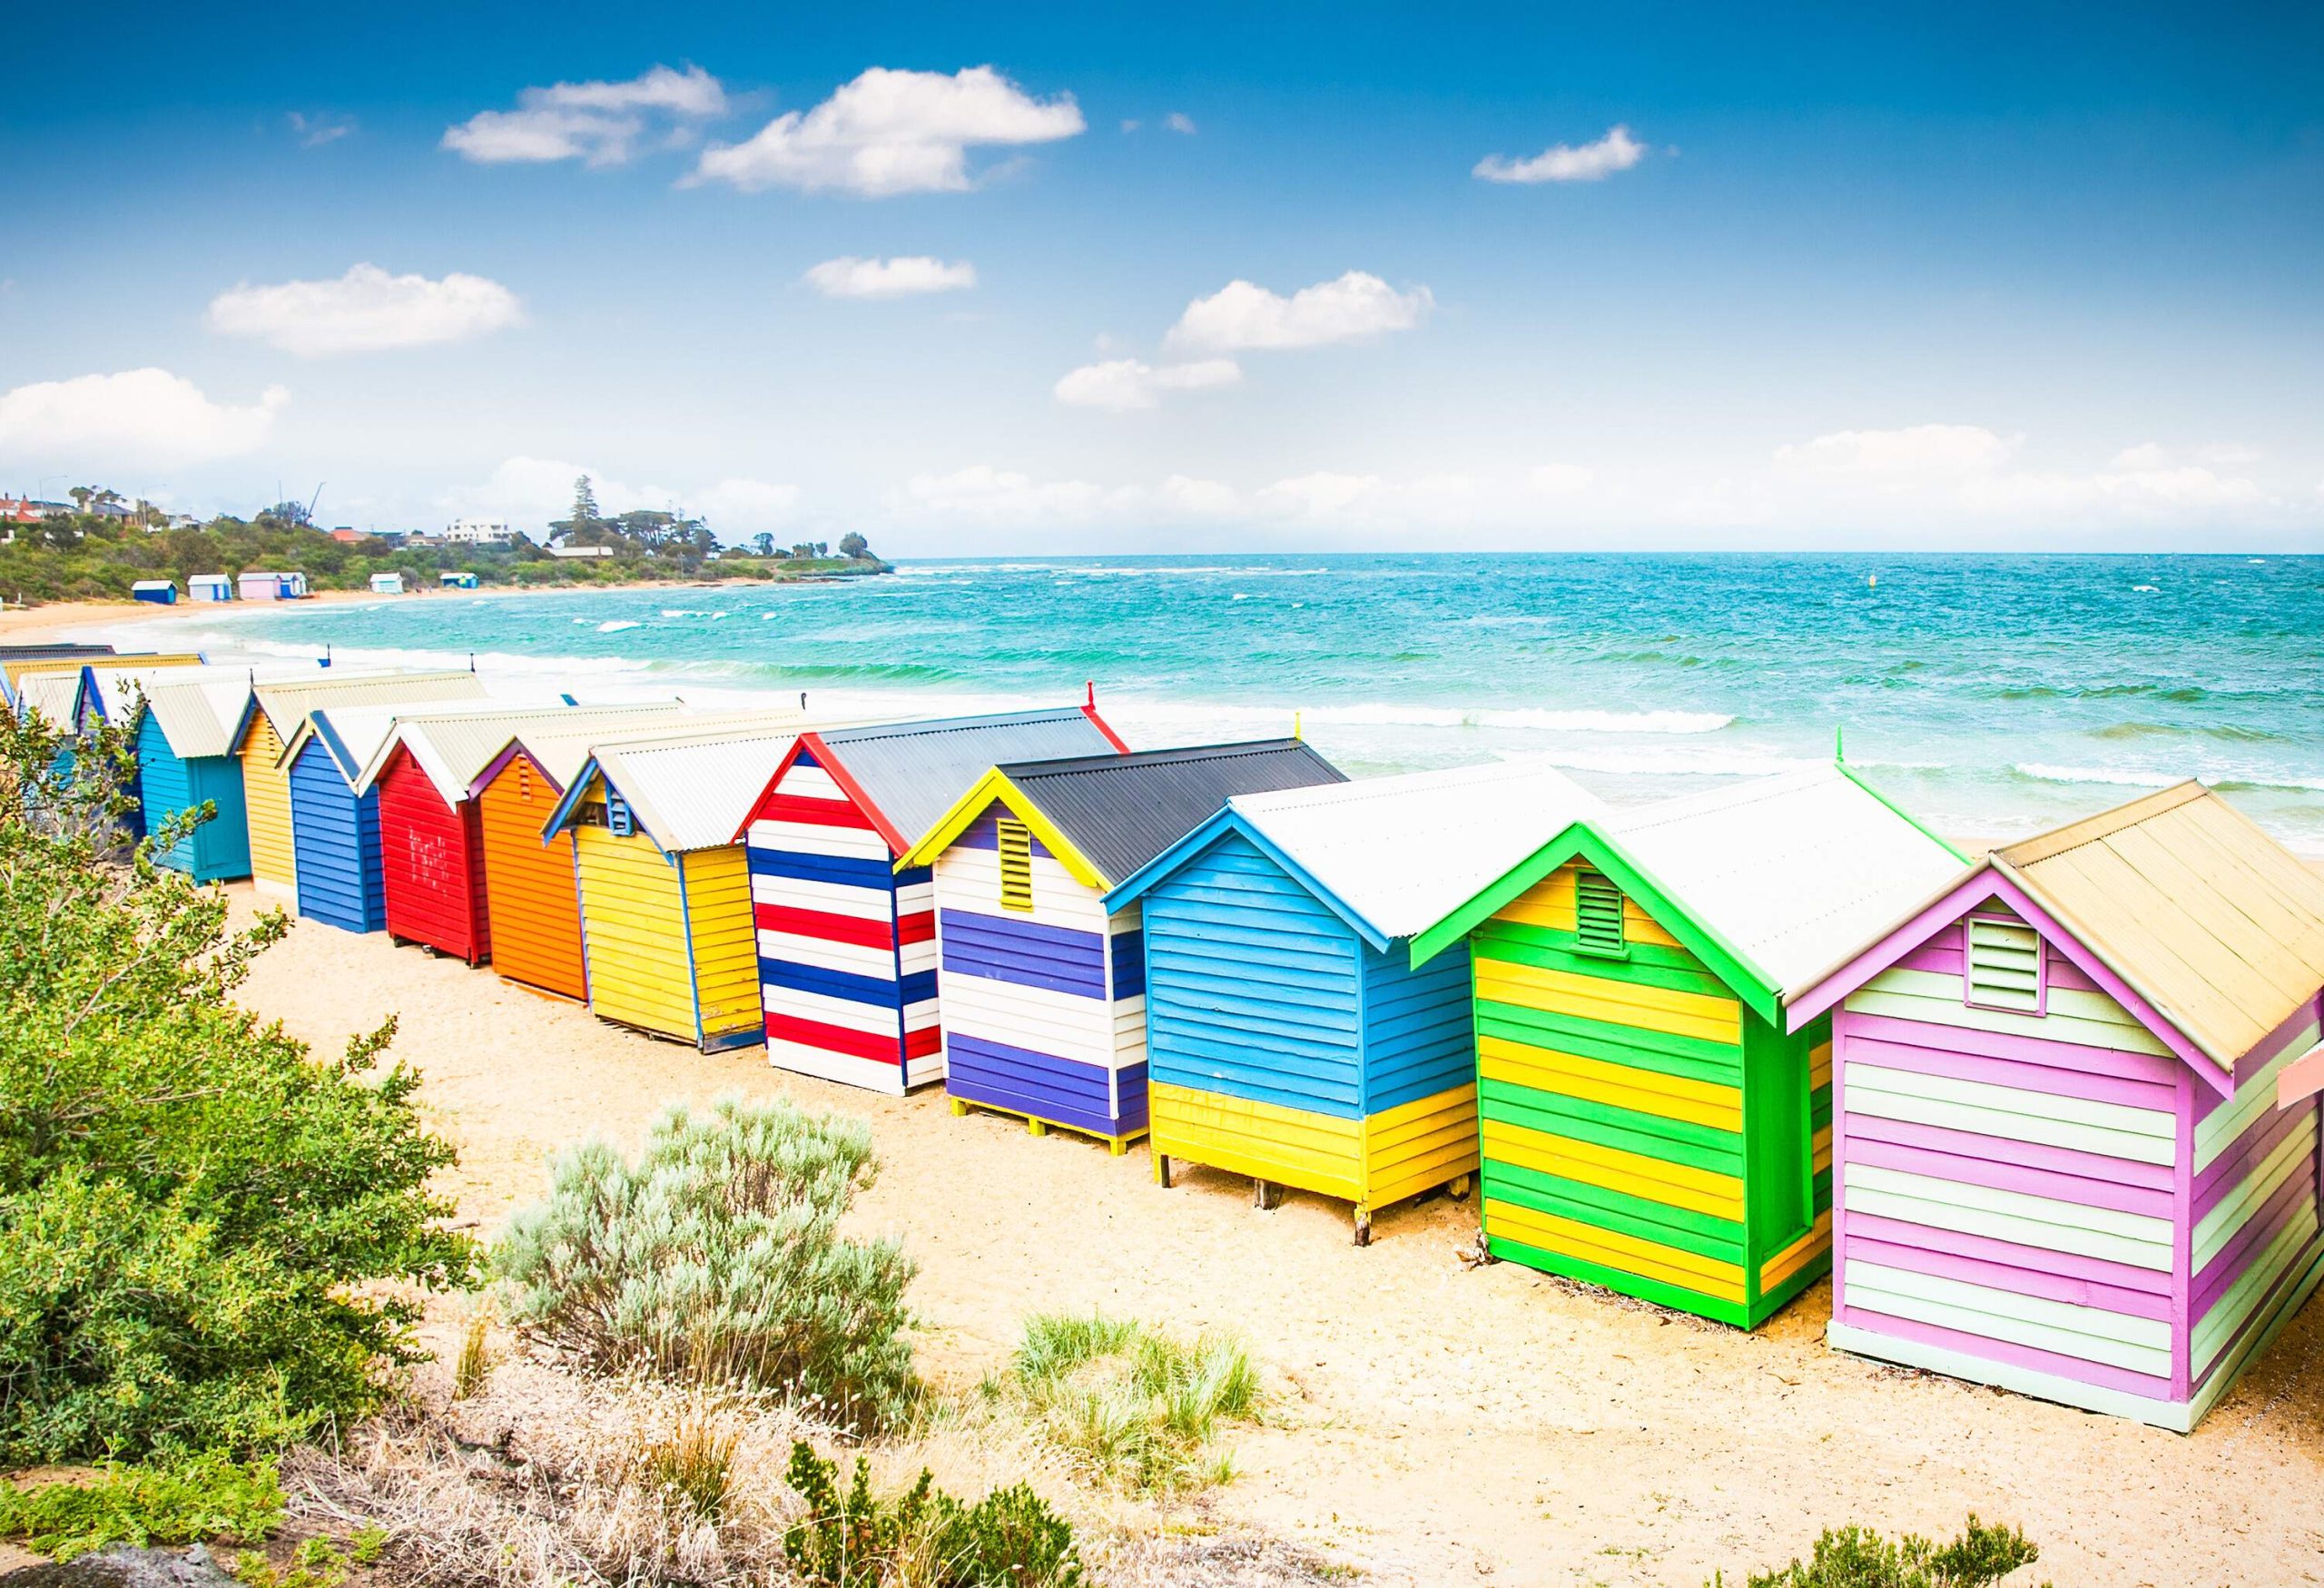 A row of colourful wooden beach huts with vast ocean views.